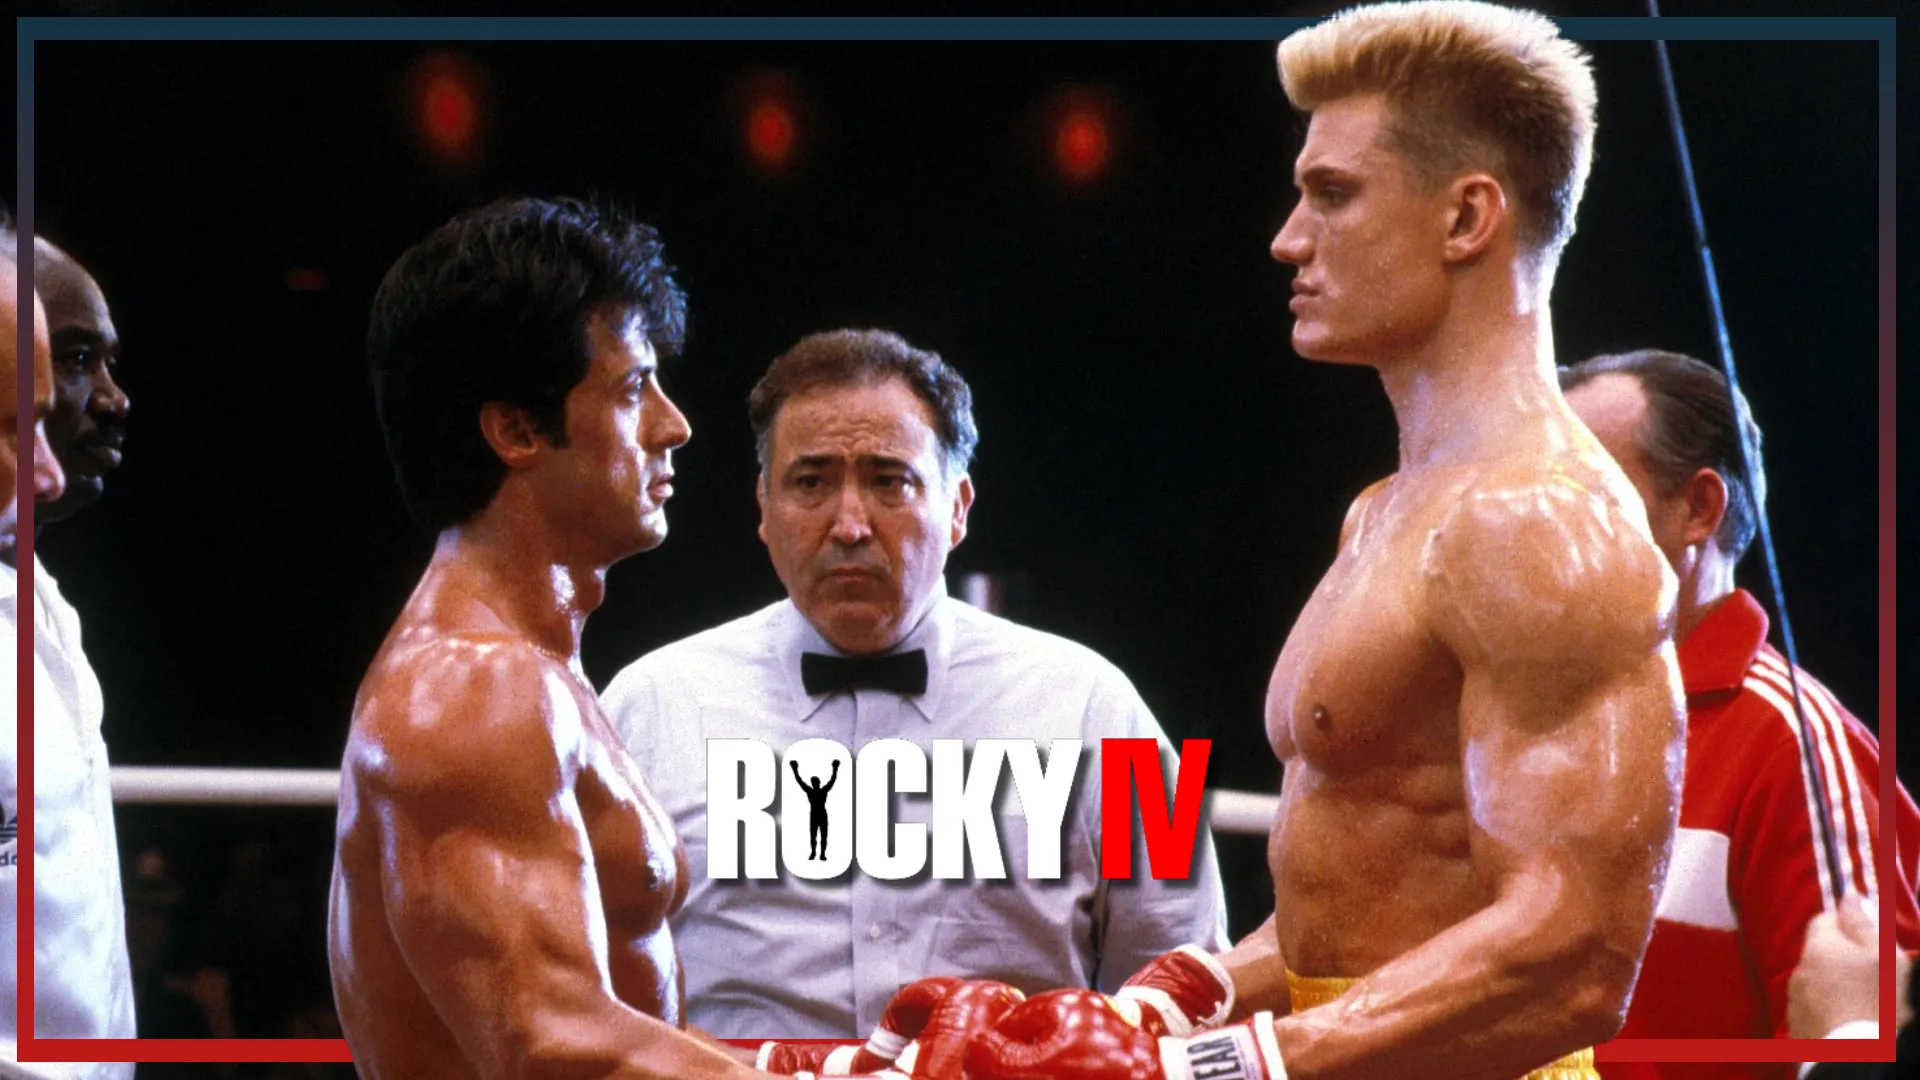 1920x1080 Stallone's 'Rocky IV' Director's Cut Titled 'Rocky Vs Drago' Future of the Force